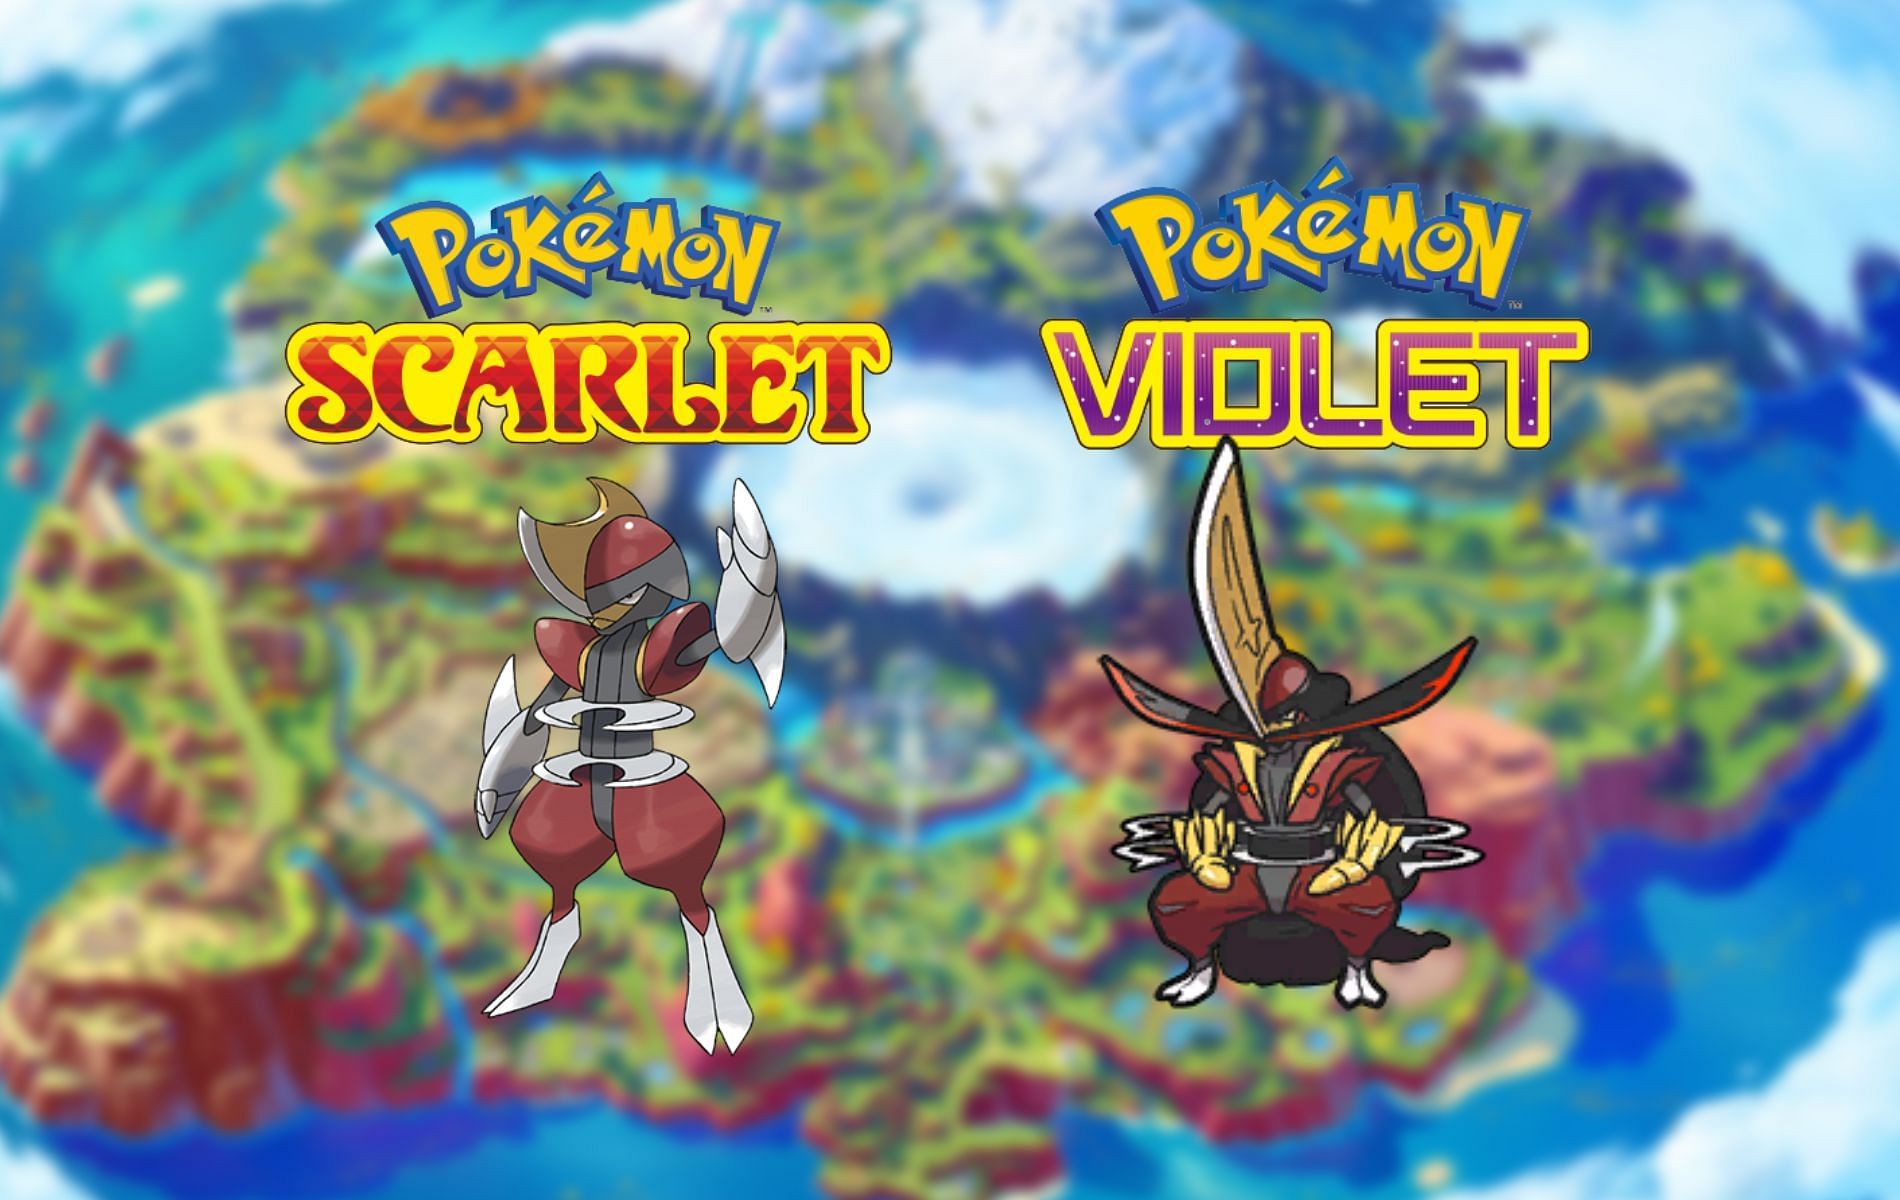 How to get Kingambit in Pokemon Scarlet and Violet